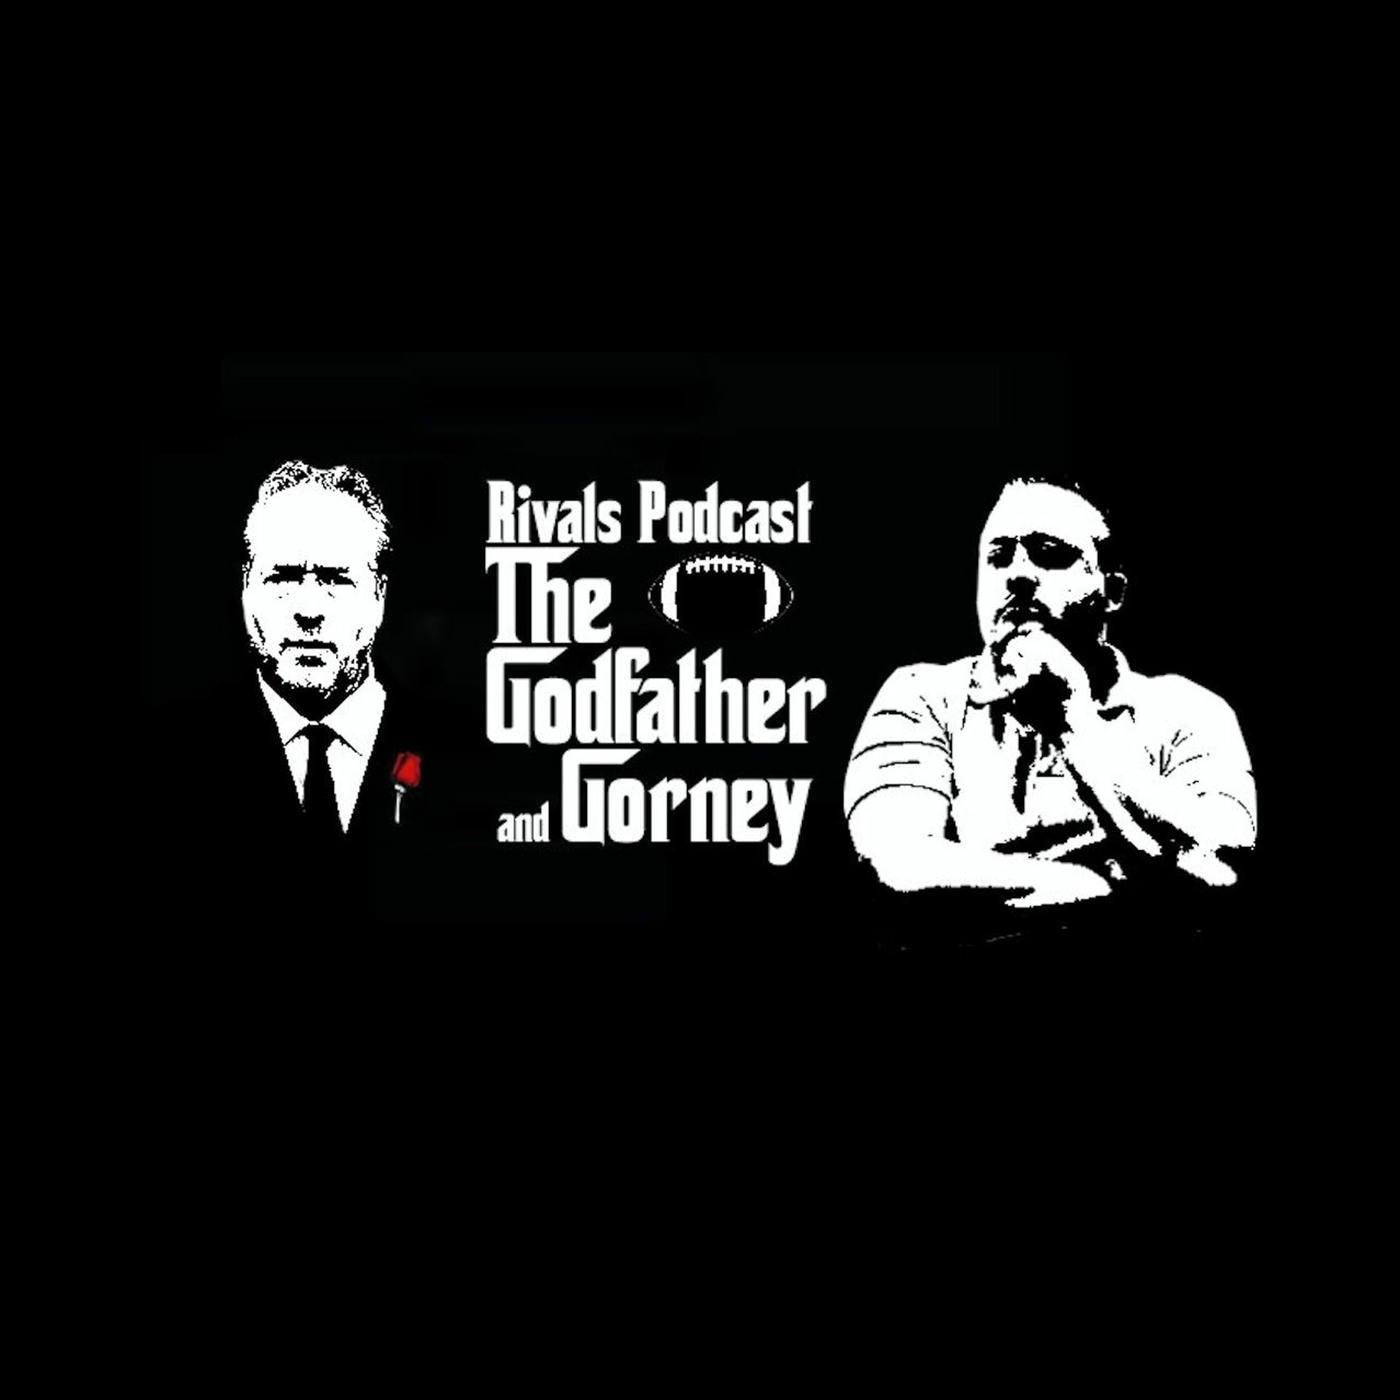 Godfather & Gorney: CFB Playoff - who is in? Is the Pac-12 OUT?